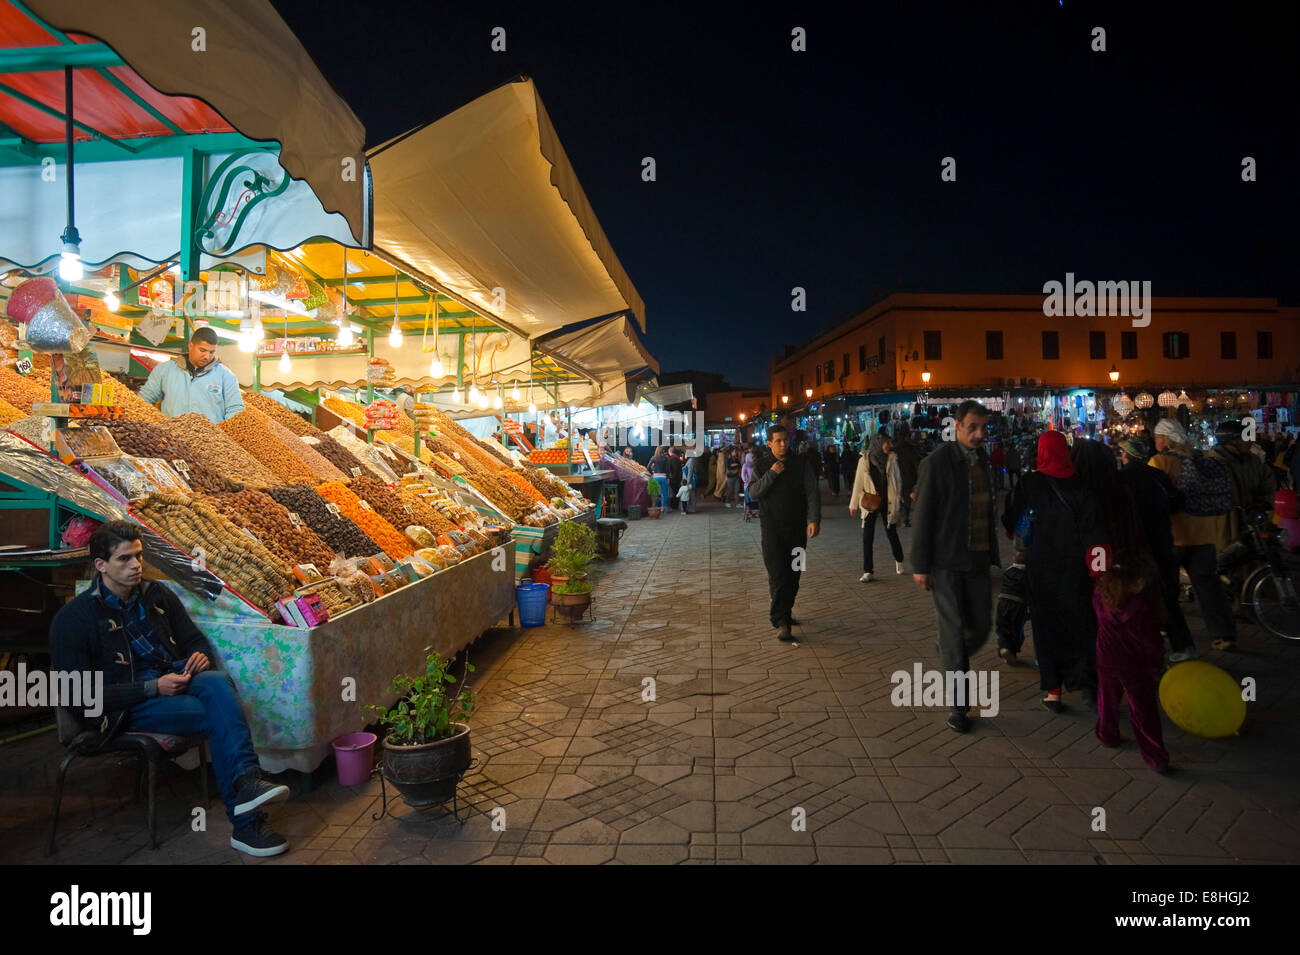 Horizontal view of the busy temporary food stalls set up in Place Jemaa el Fna (Djemaa el Fnaa) in Marrakech at night. Stock Photo